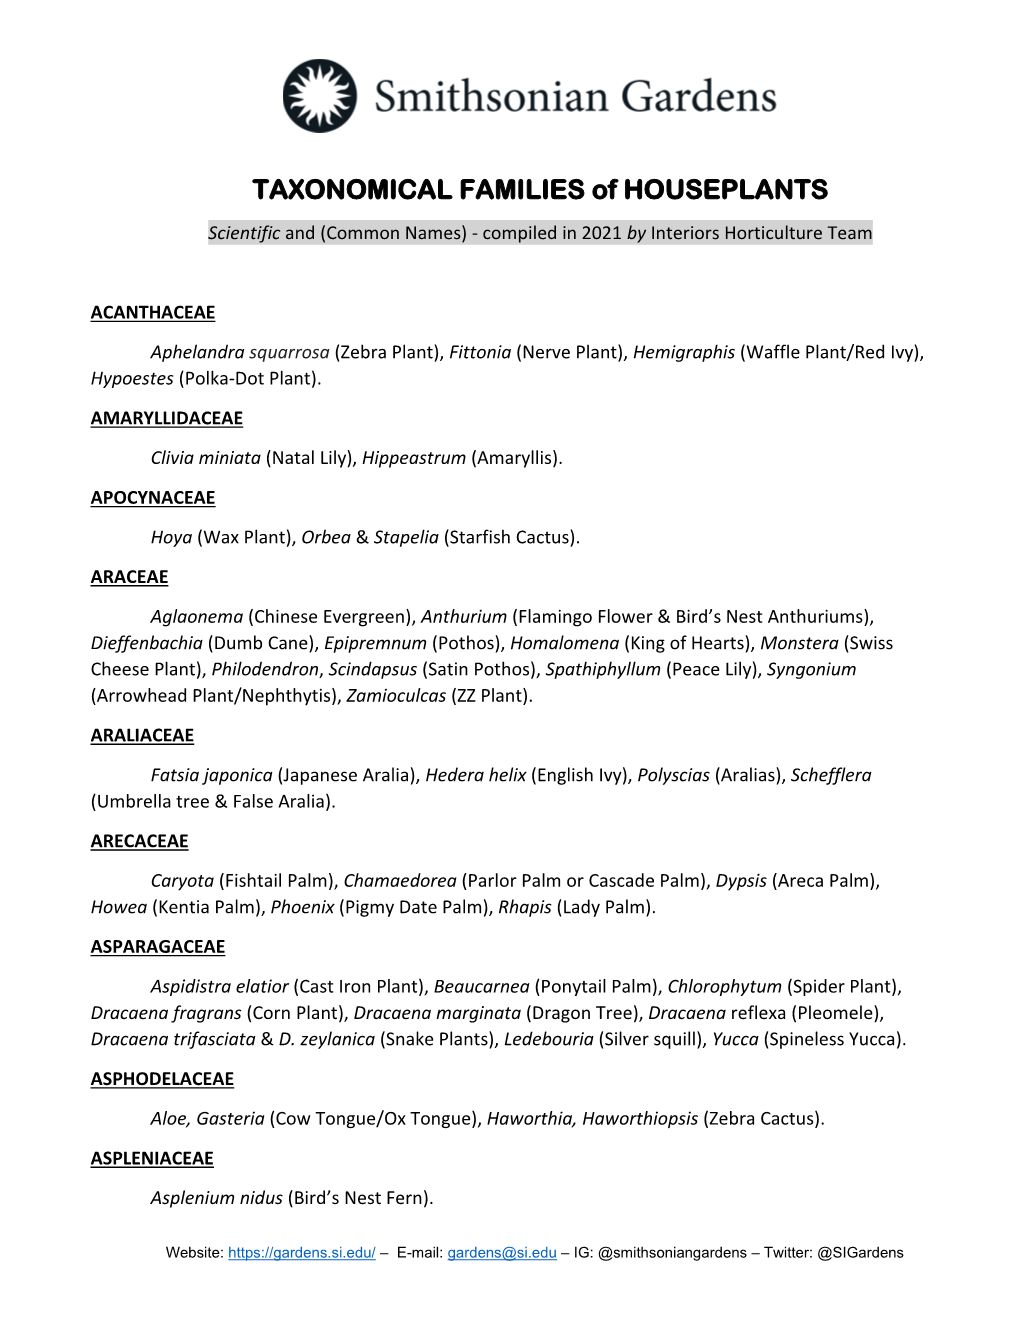 Handout for Taxonomical Families of Houseplants